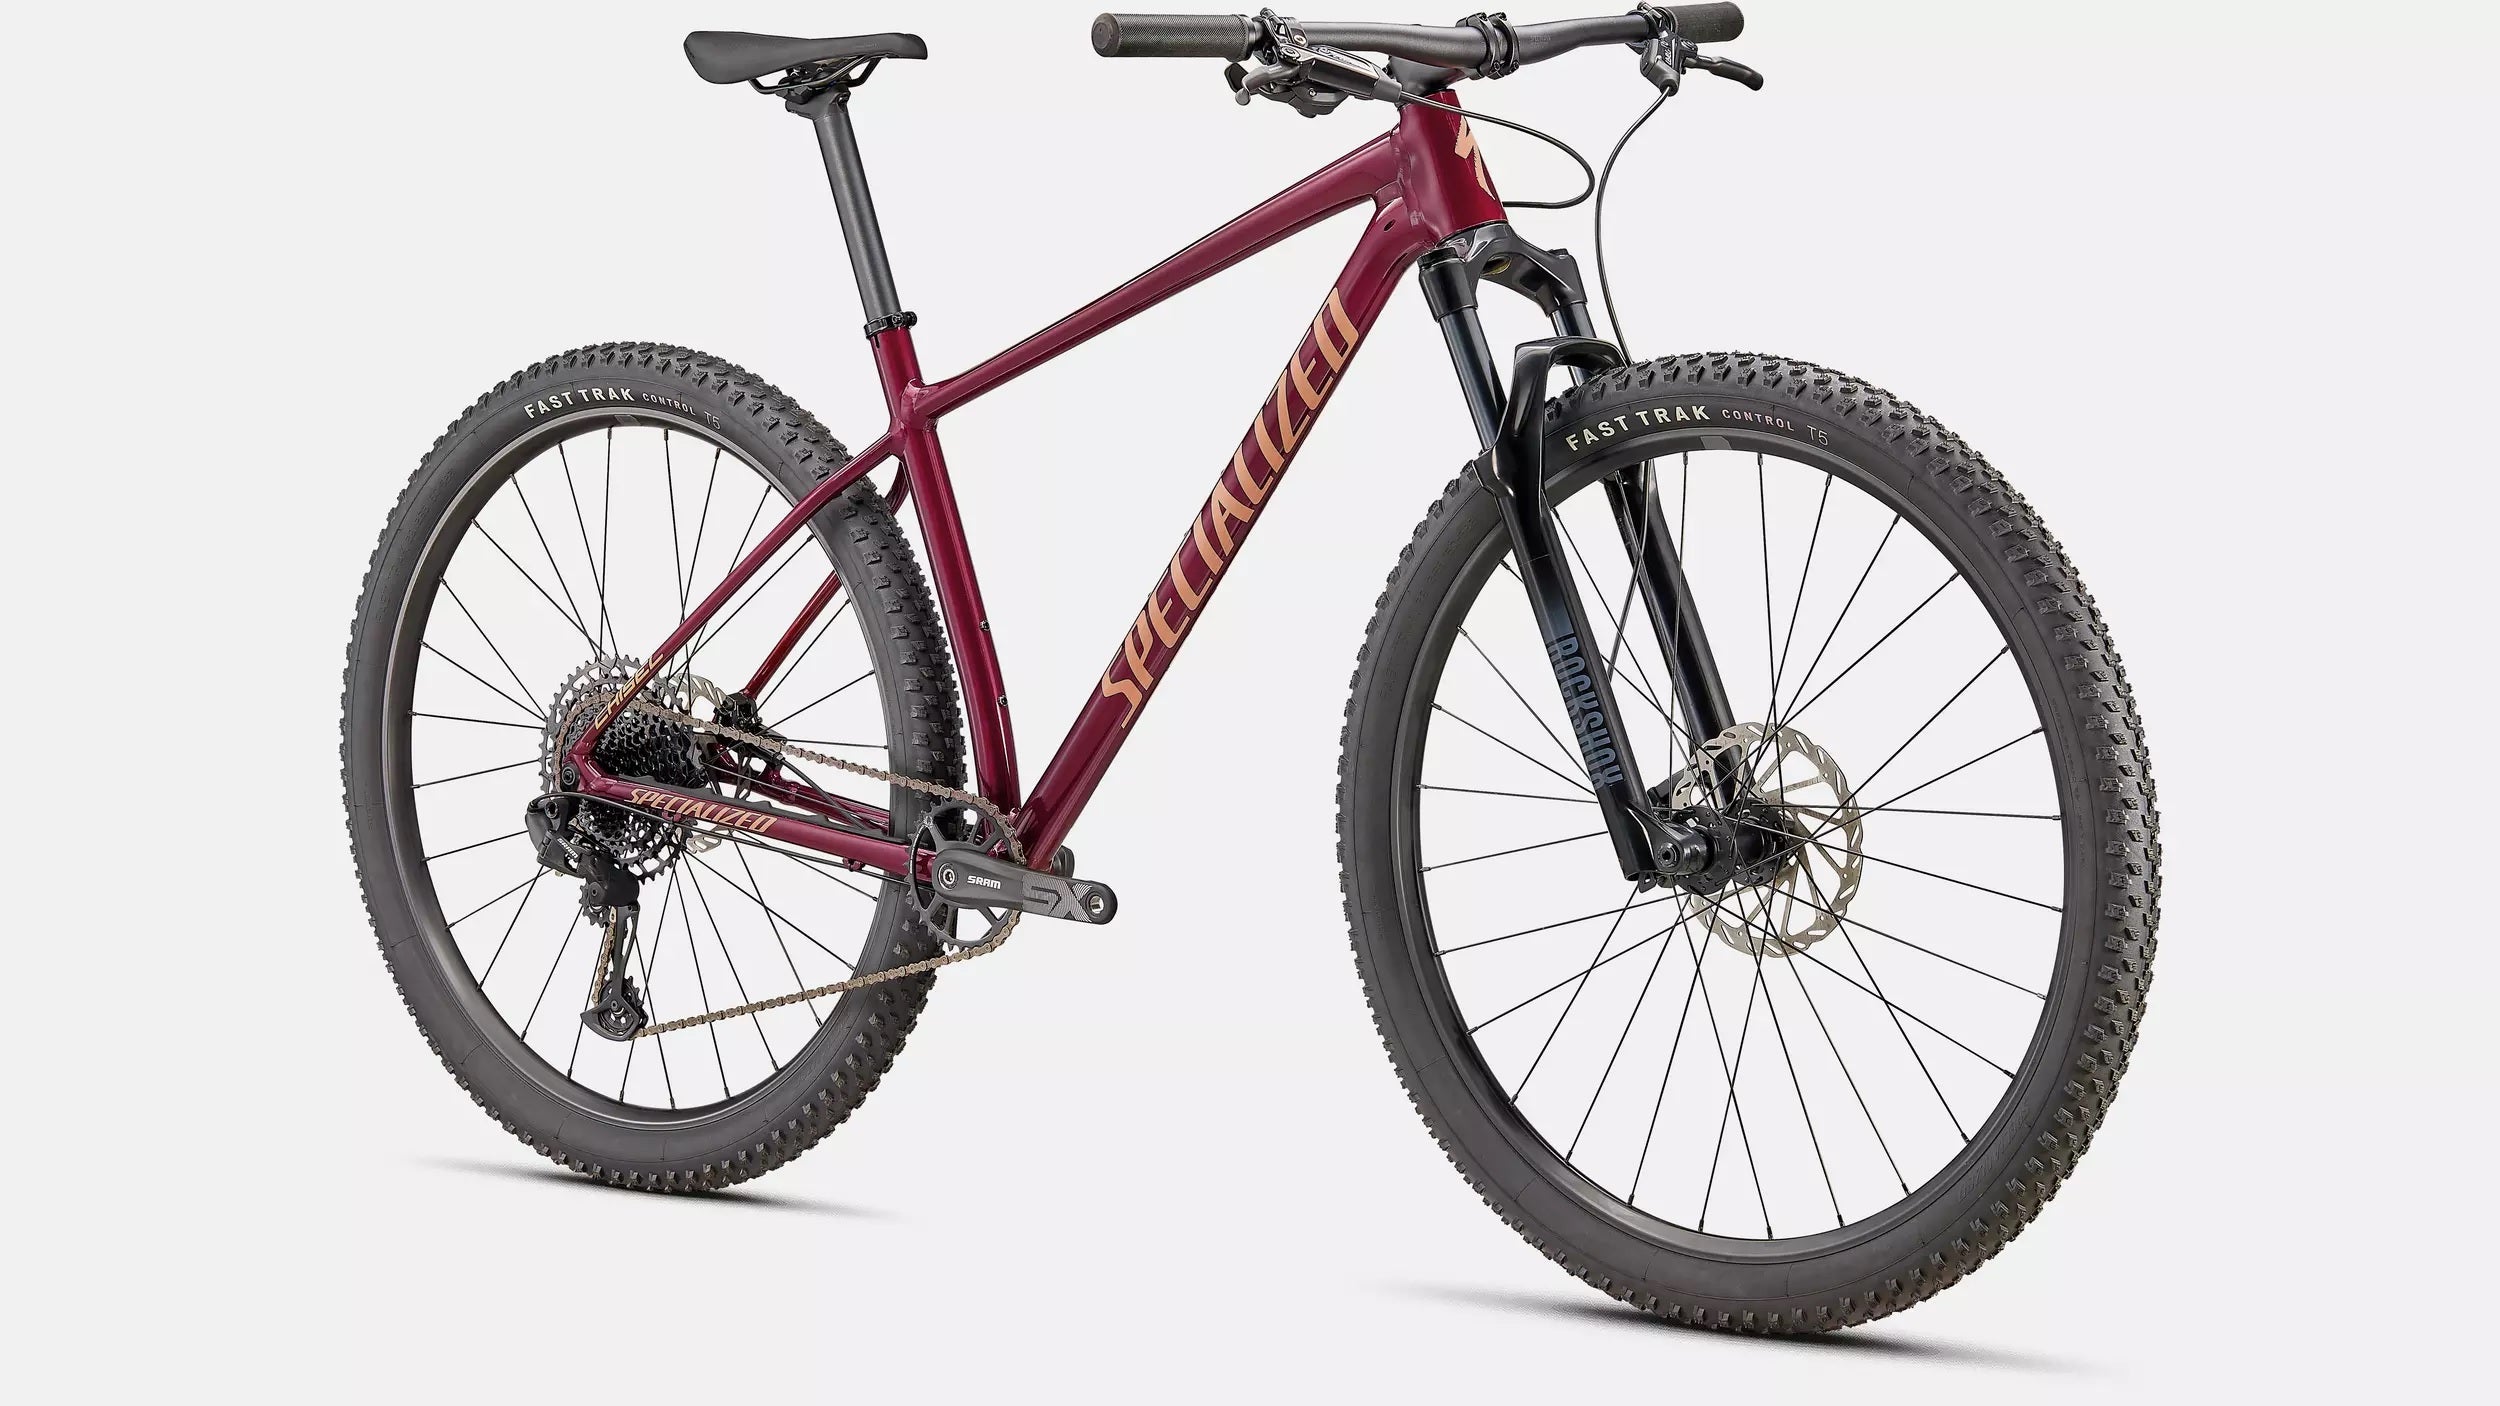 Specialized Chisel Hardtail Mountain Bike